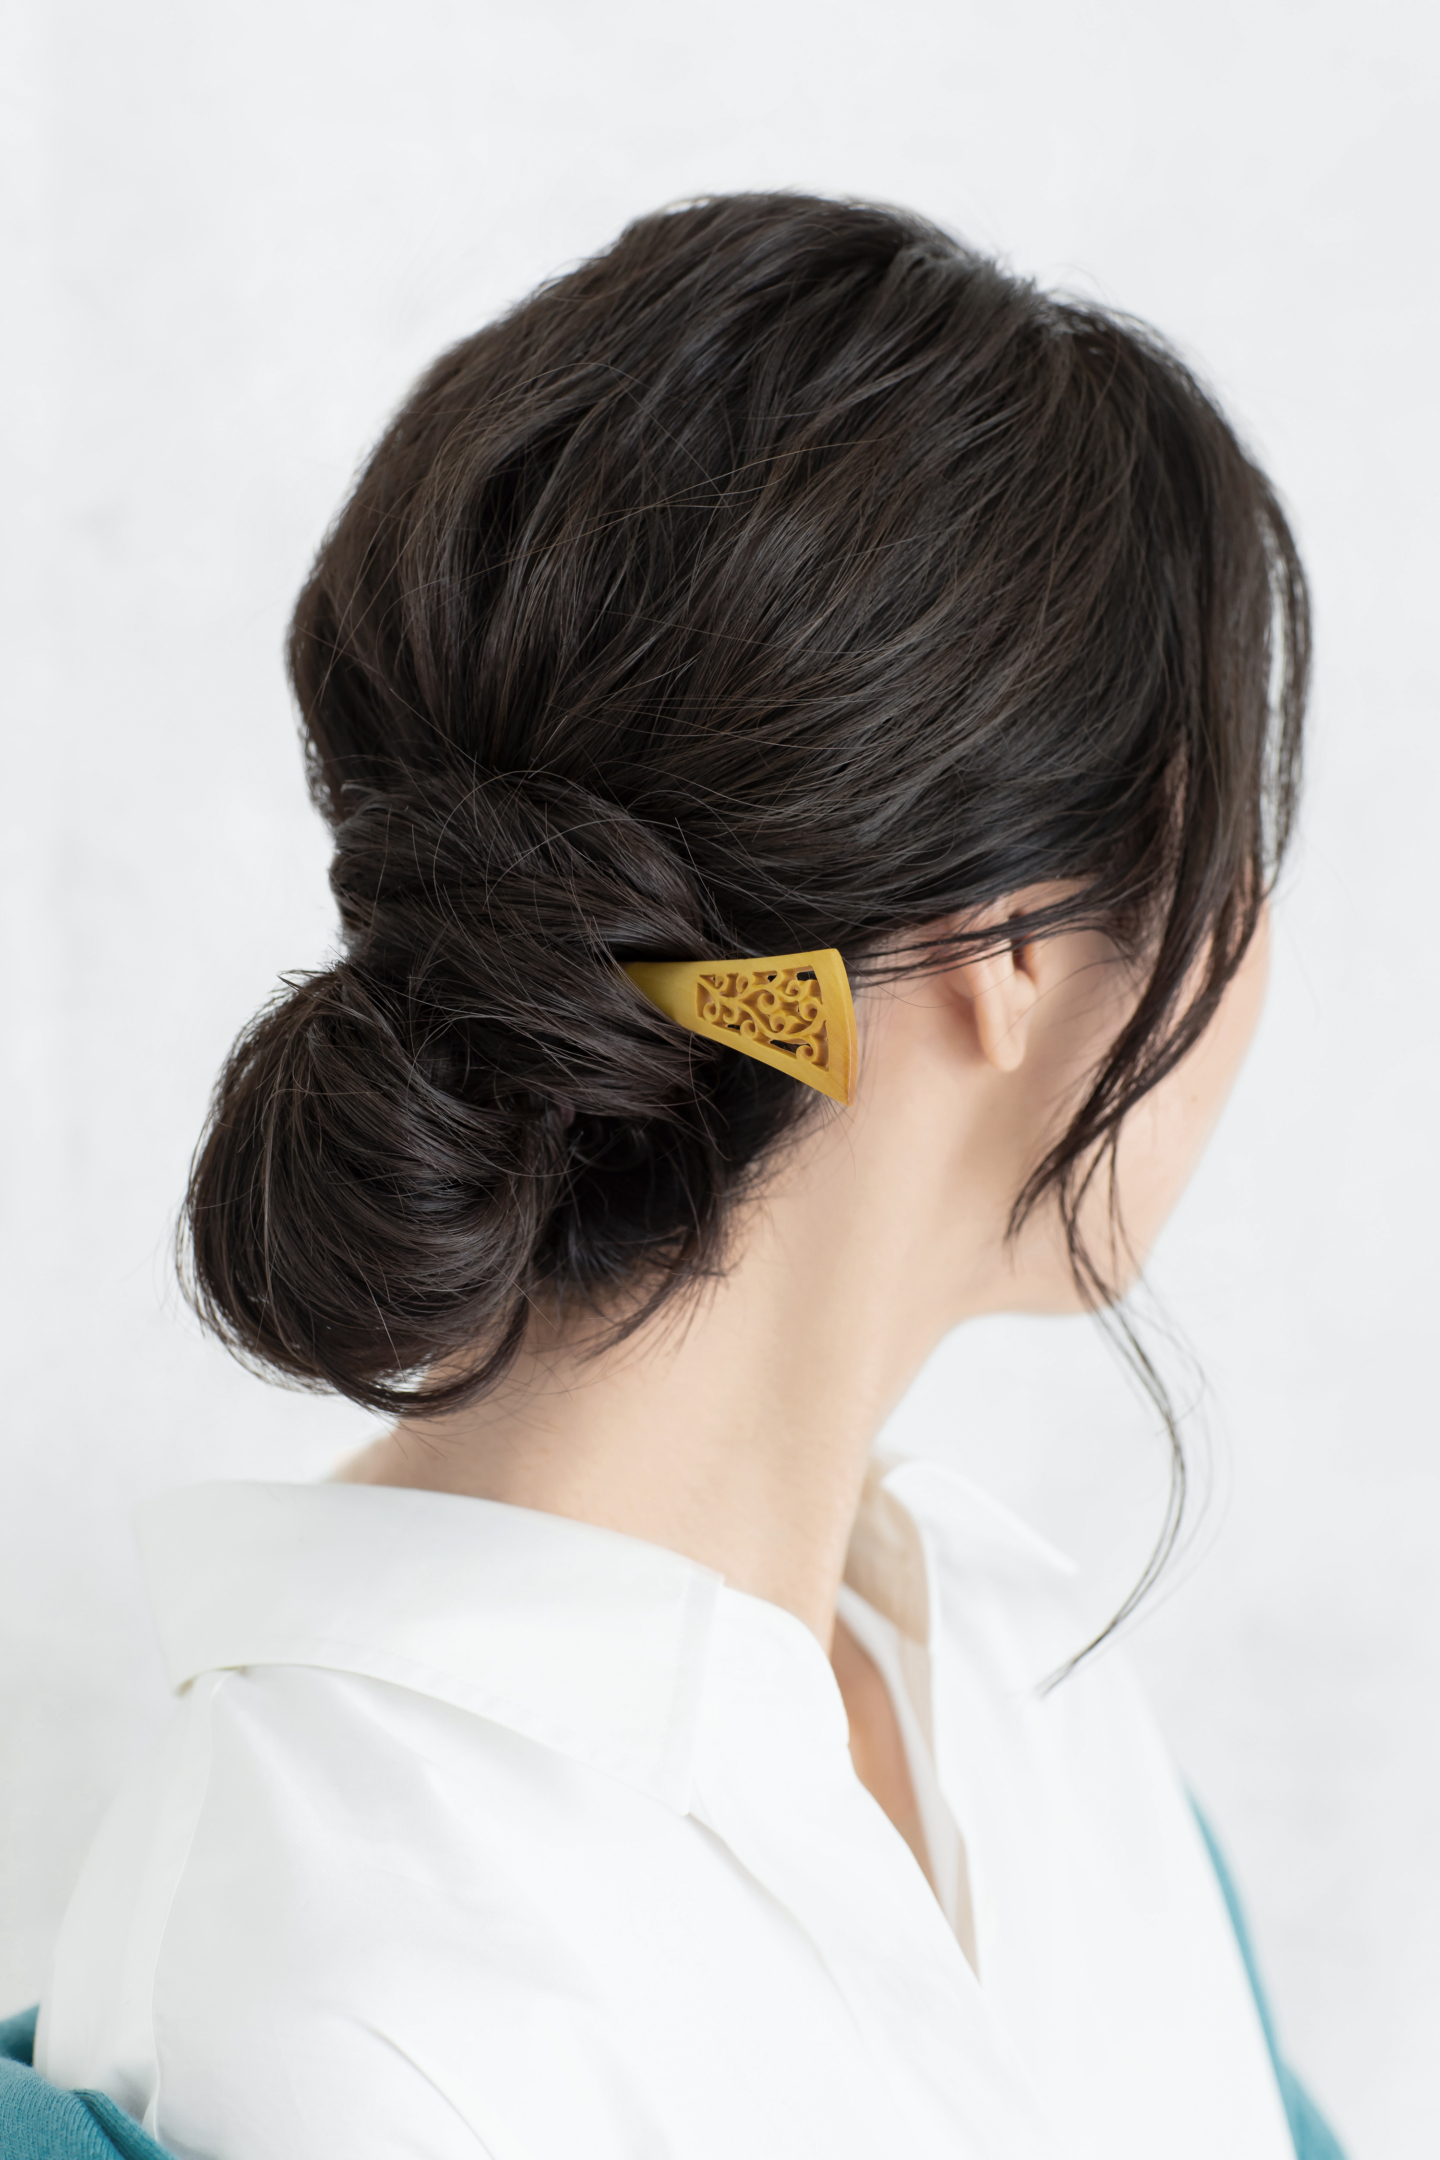 Hair accessories made with hontsuge (Japanese boxwood), for some everyday flair